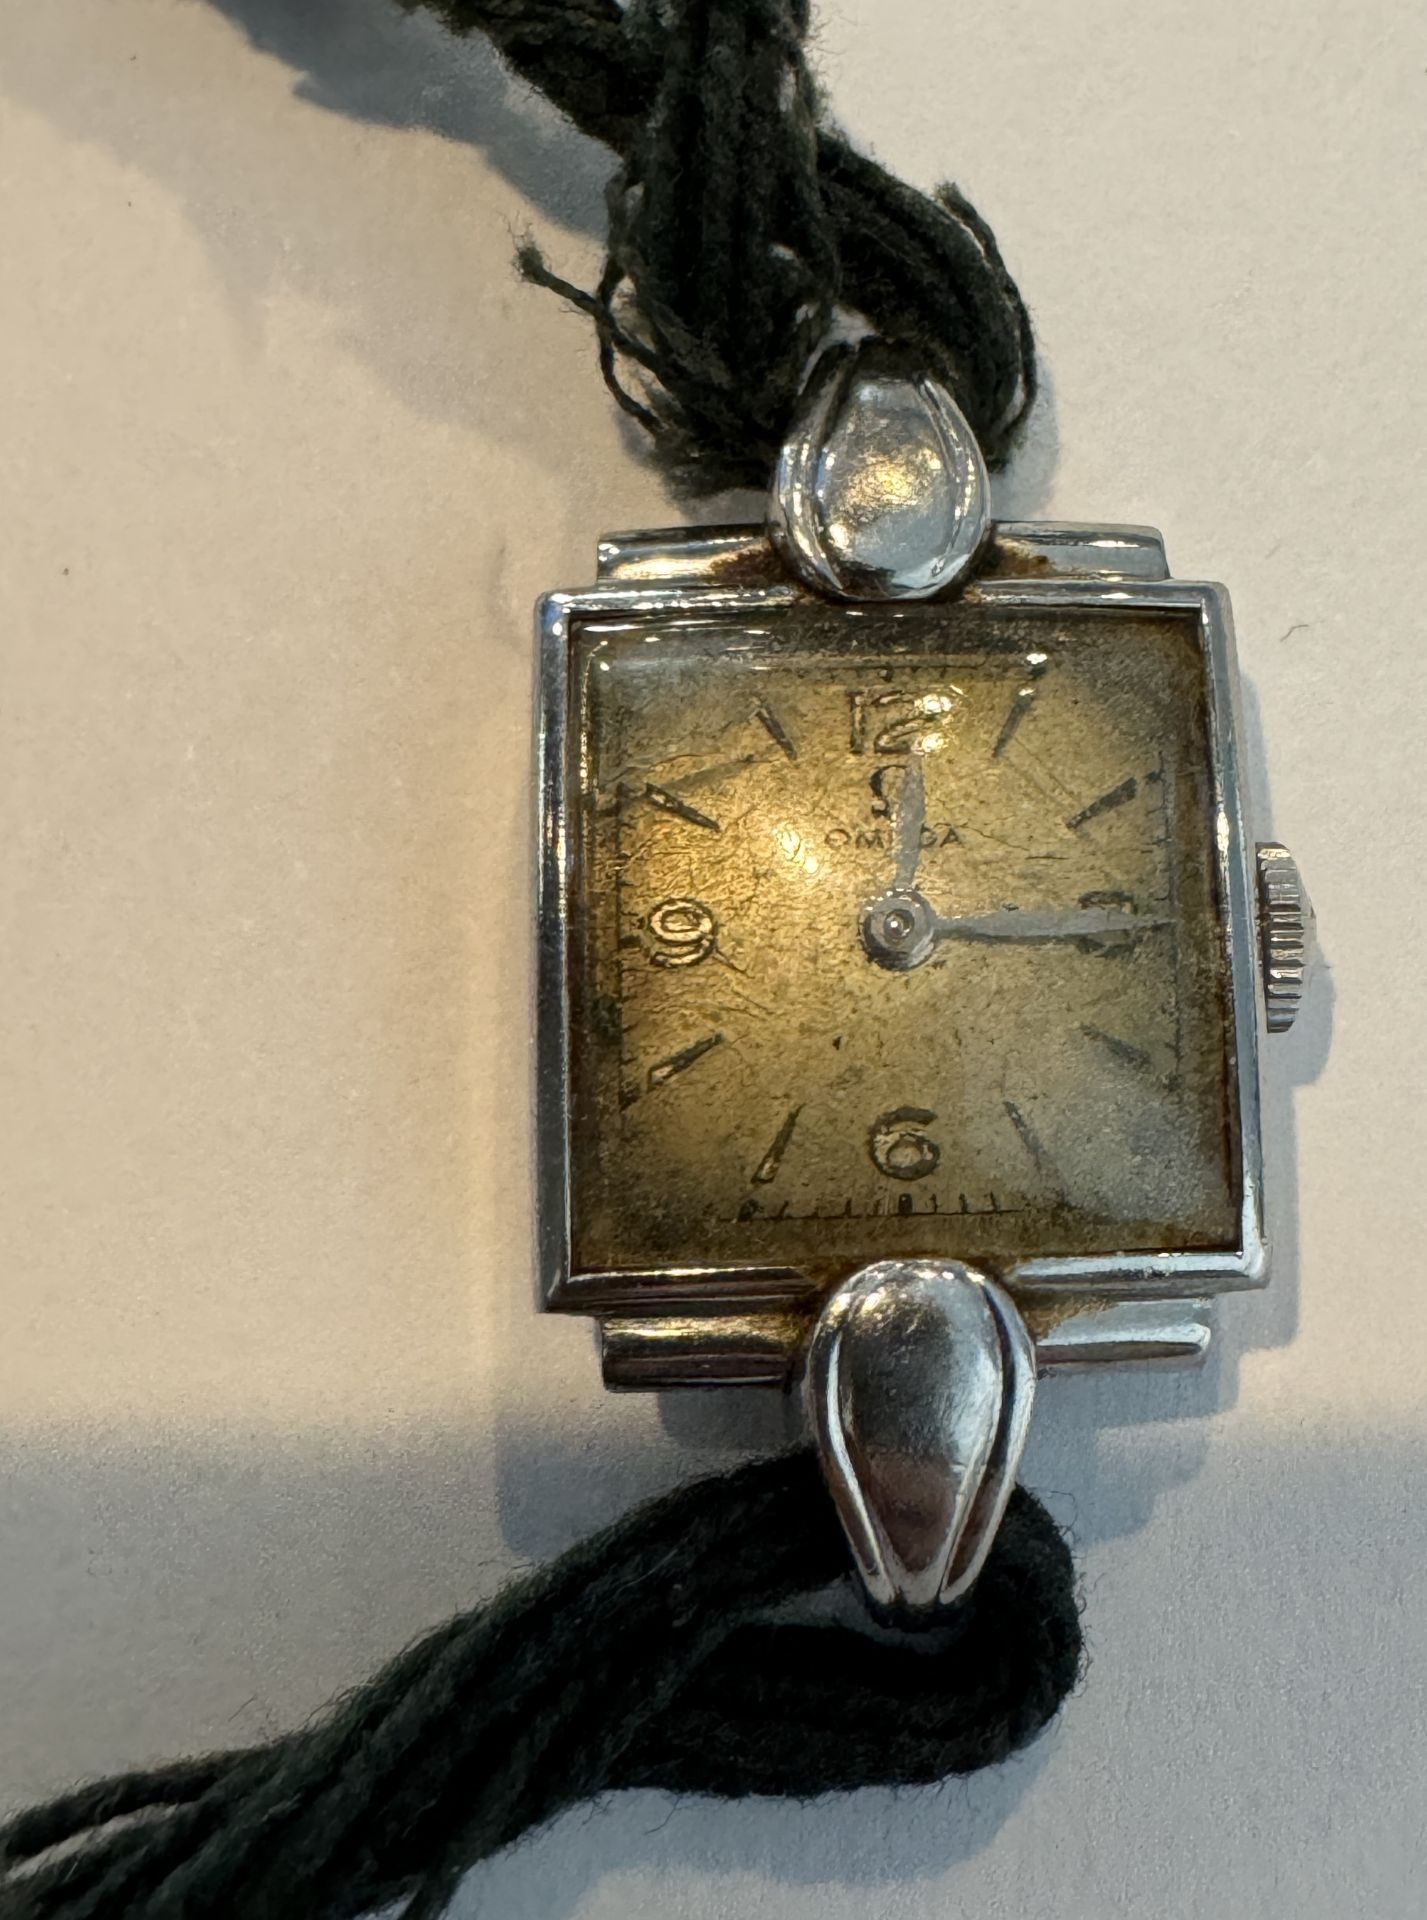 ANTIQUE WOMENS OMEGA WATCH - Image 2 of 3